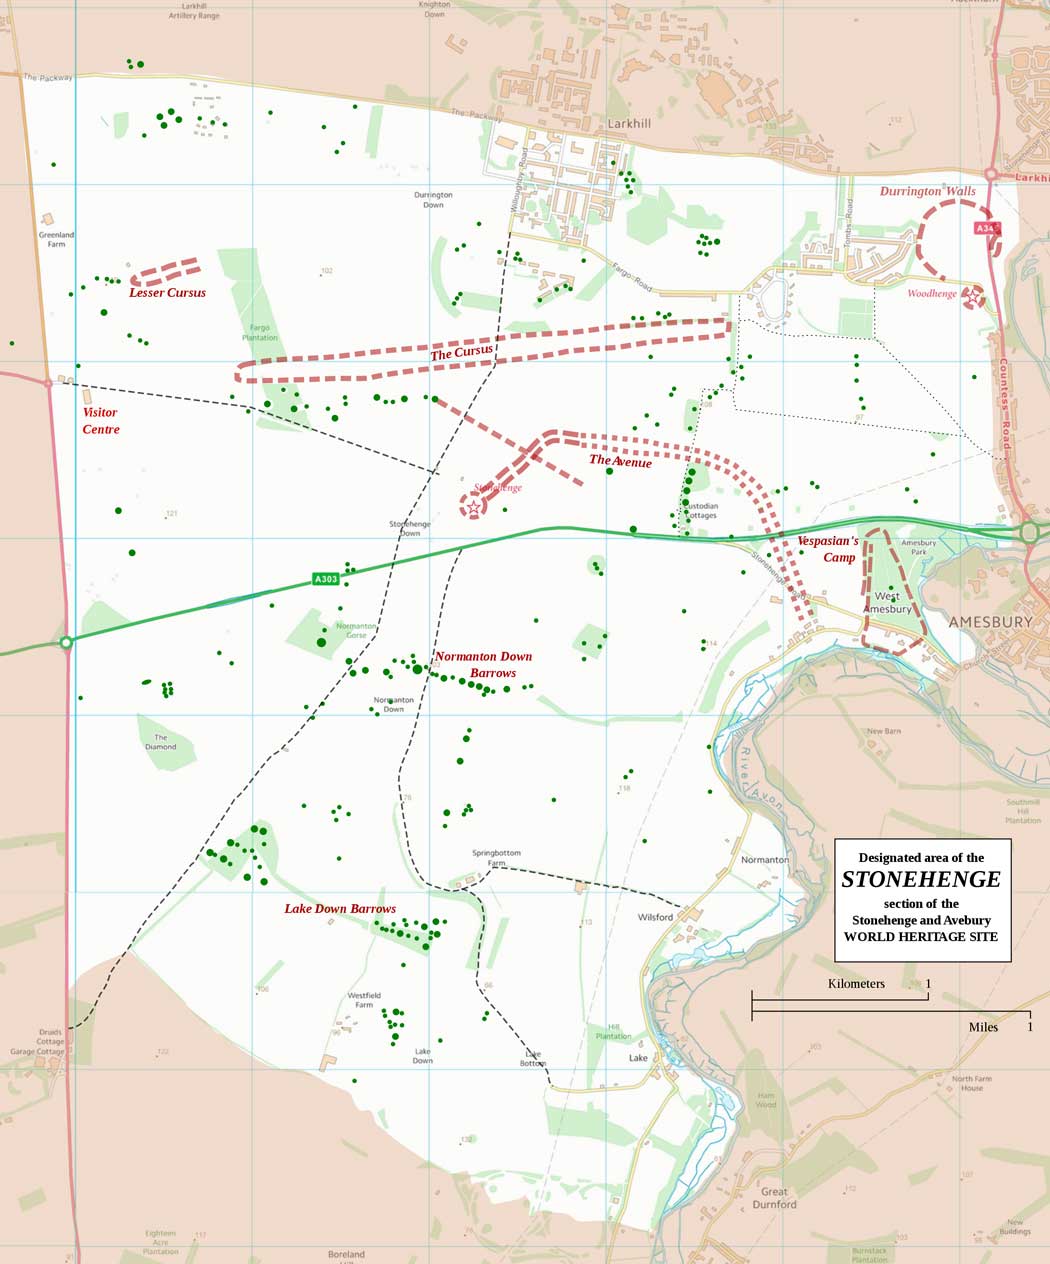 Map of the Stonehenge area of the Stonehenge and Avebury World Heritage Site (Contains Ordnance Survey data © Crown copyright and database right (2019))